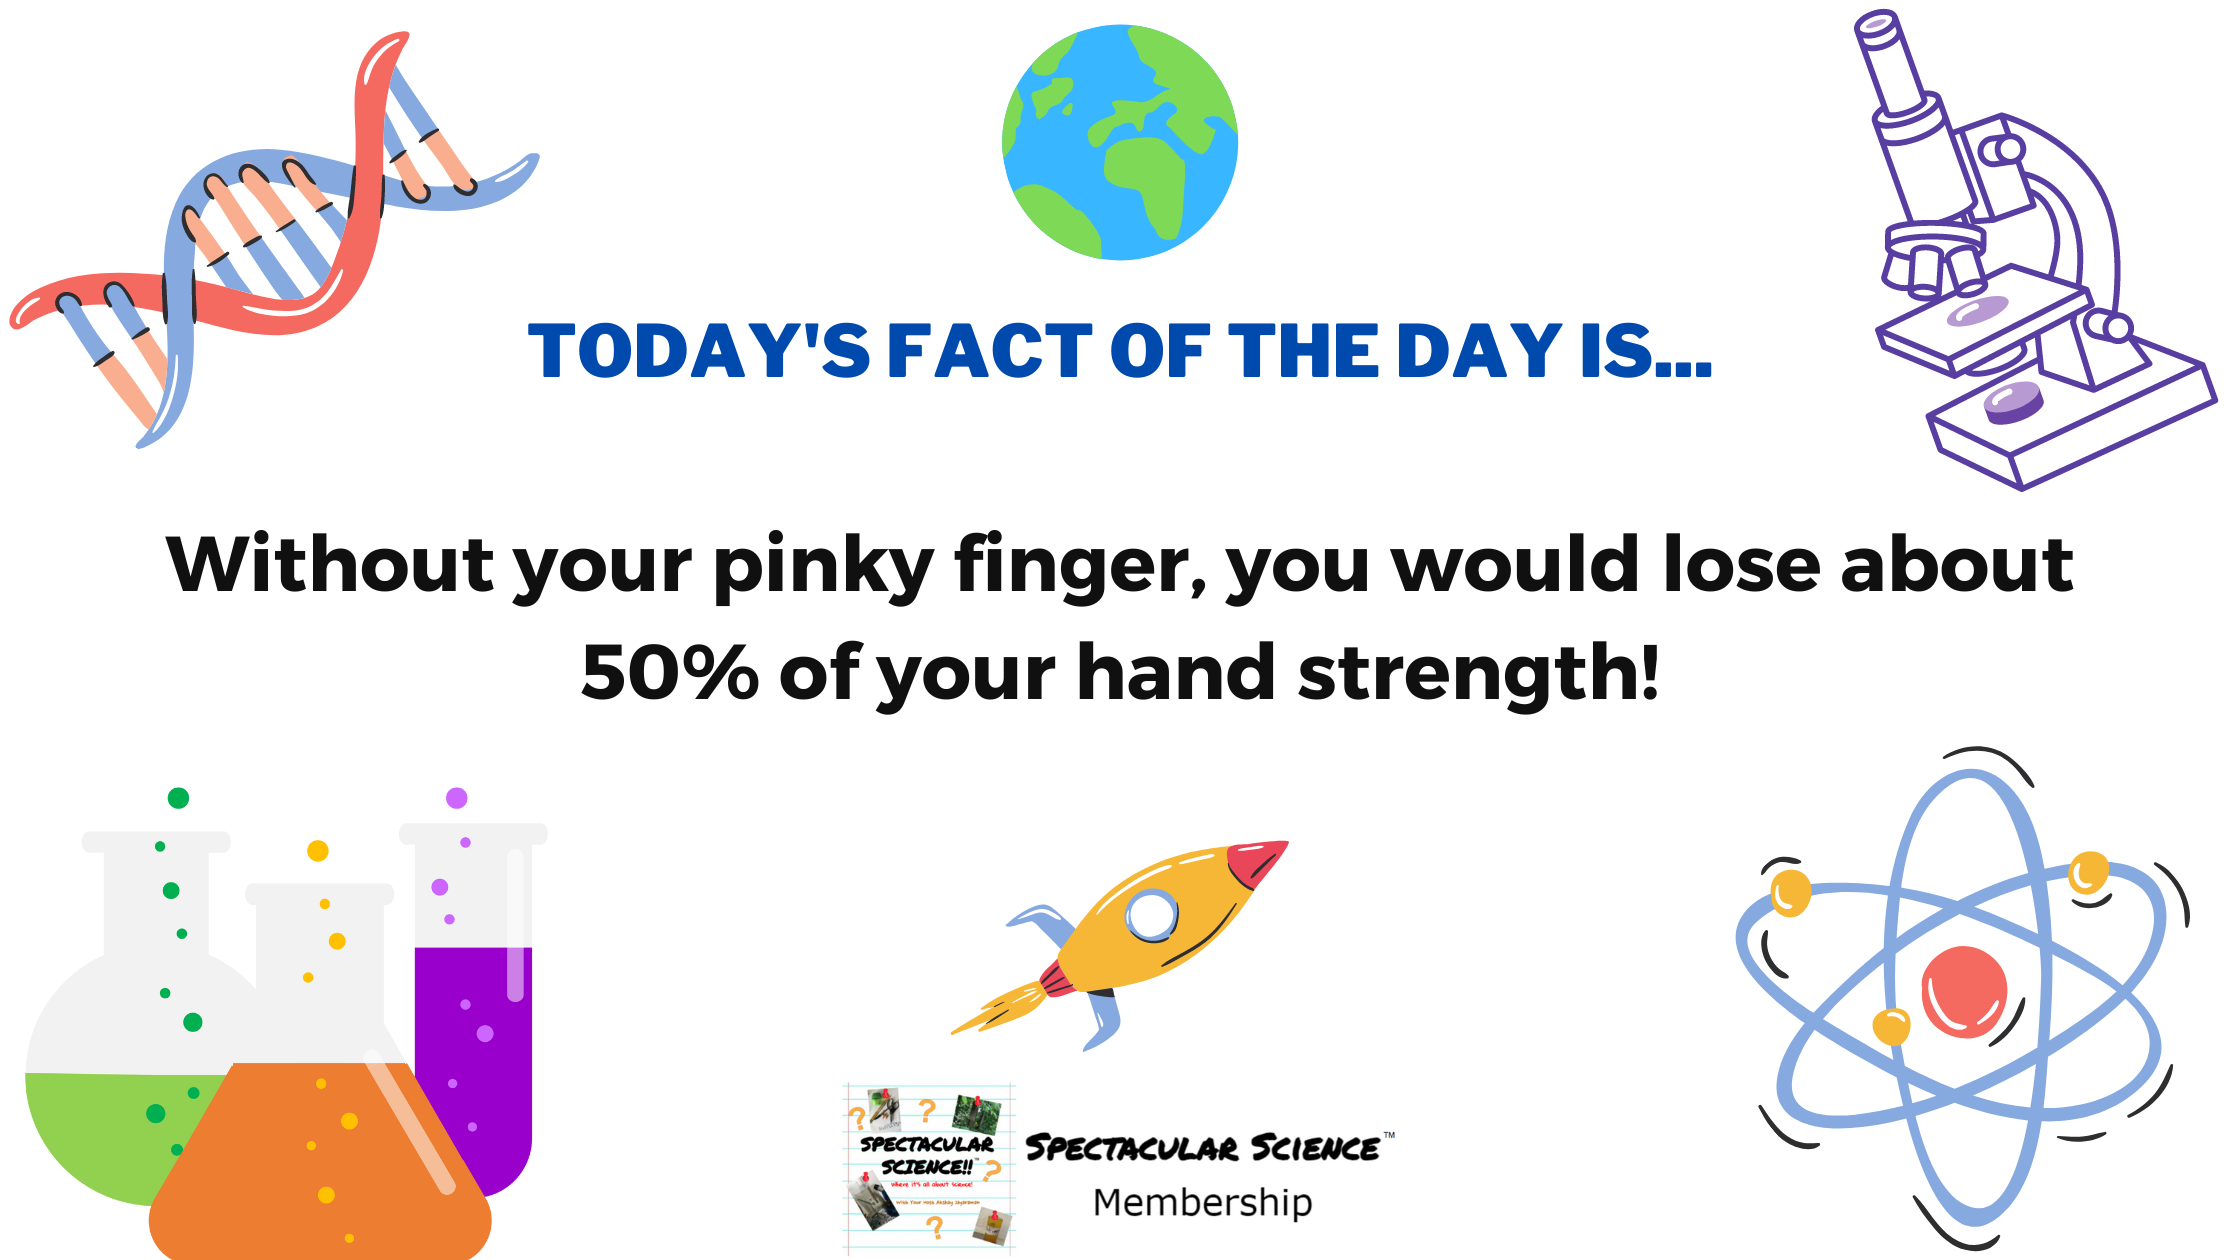 Fact of the Day Image July 27th